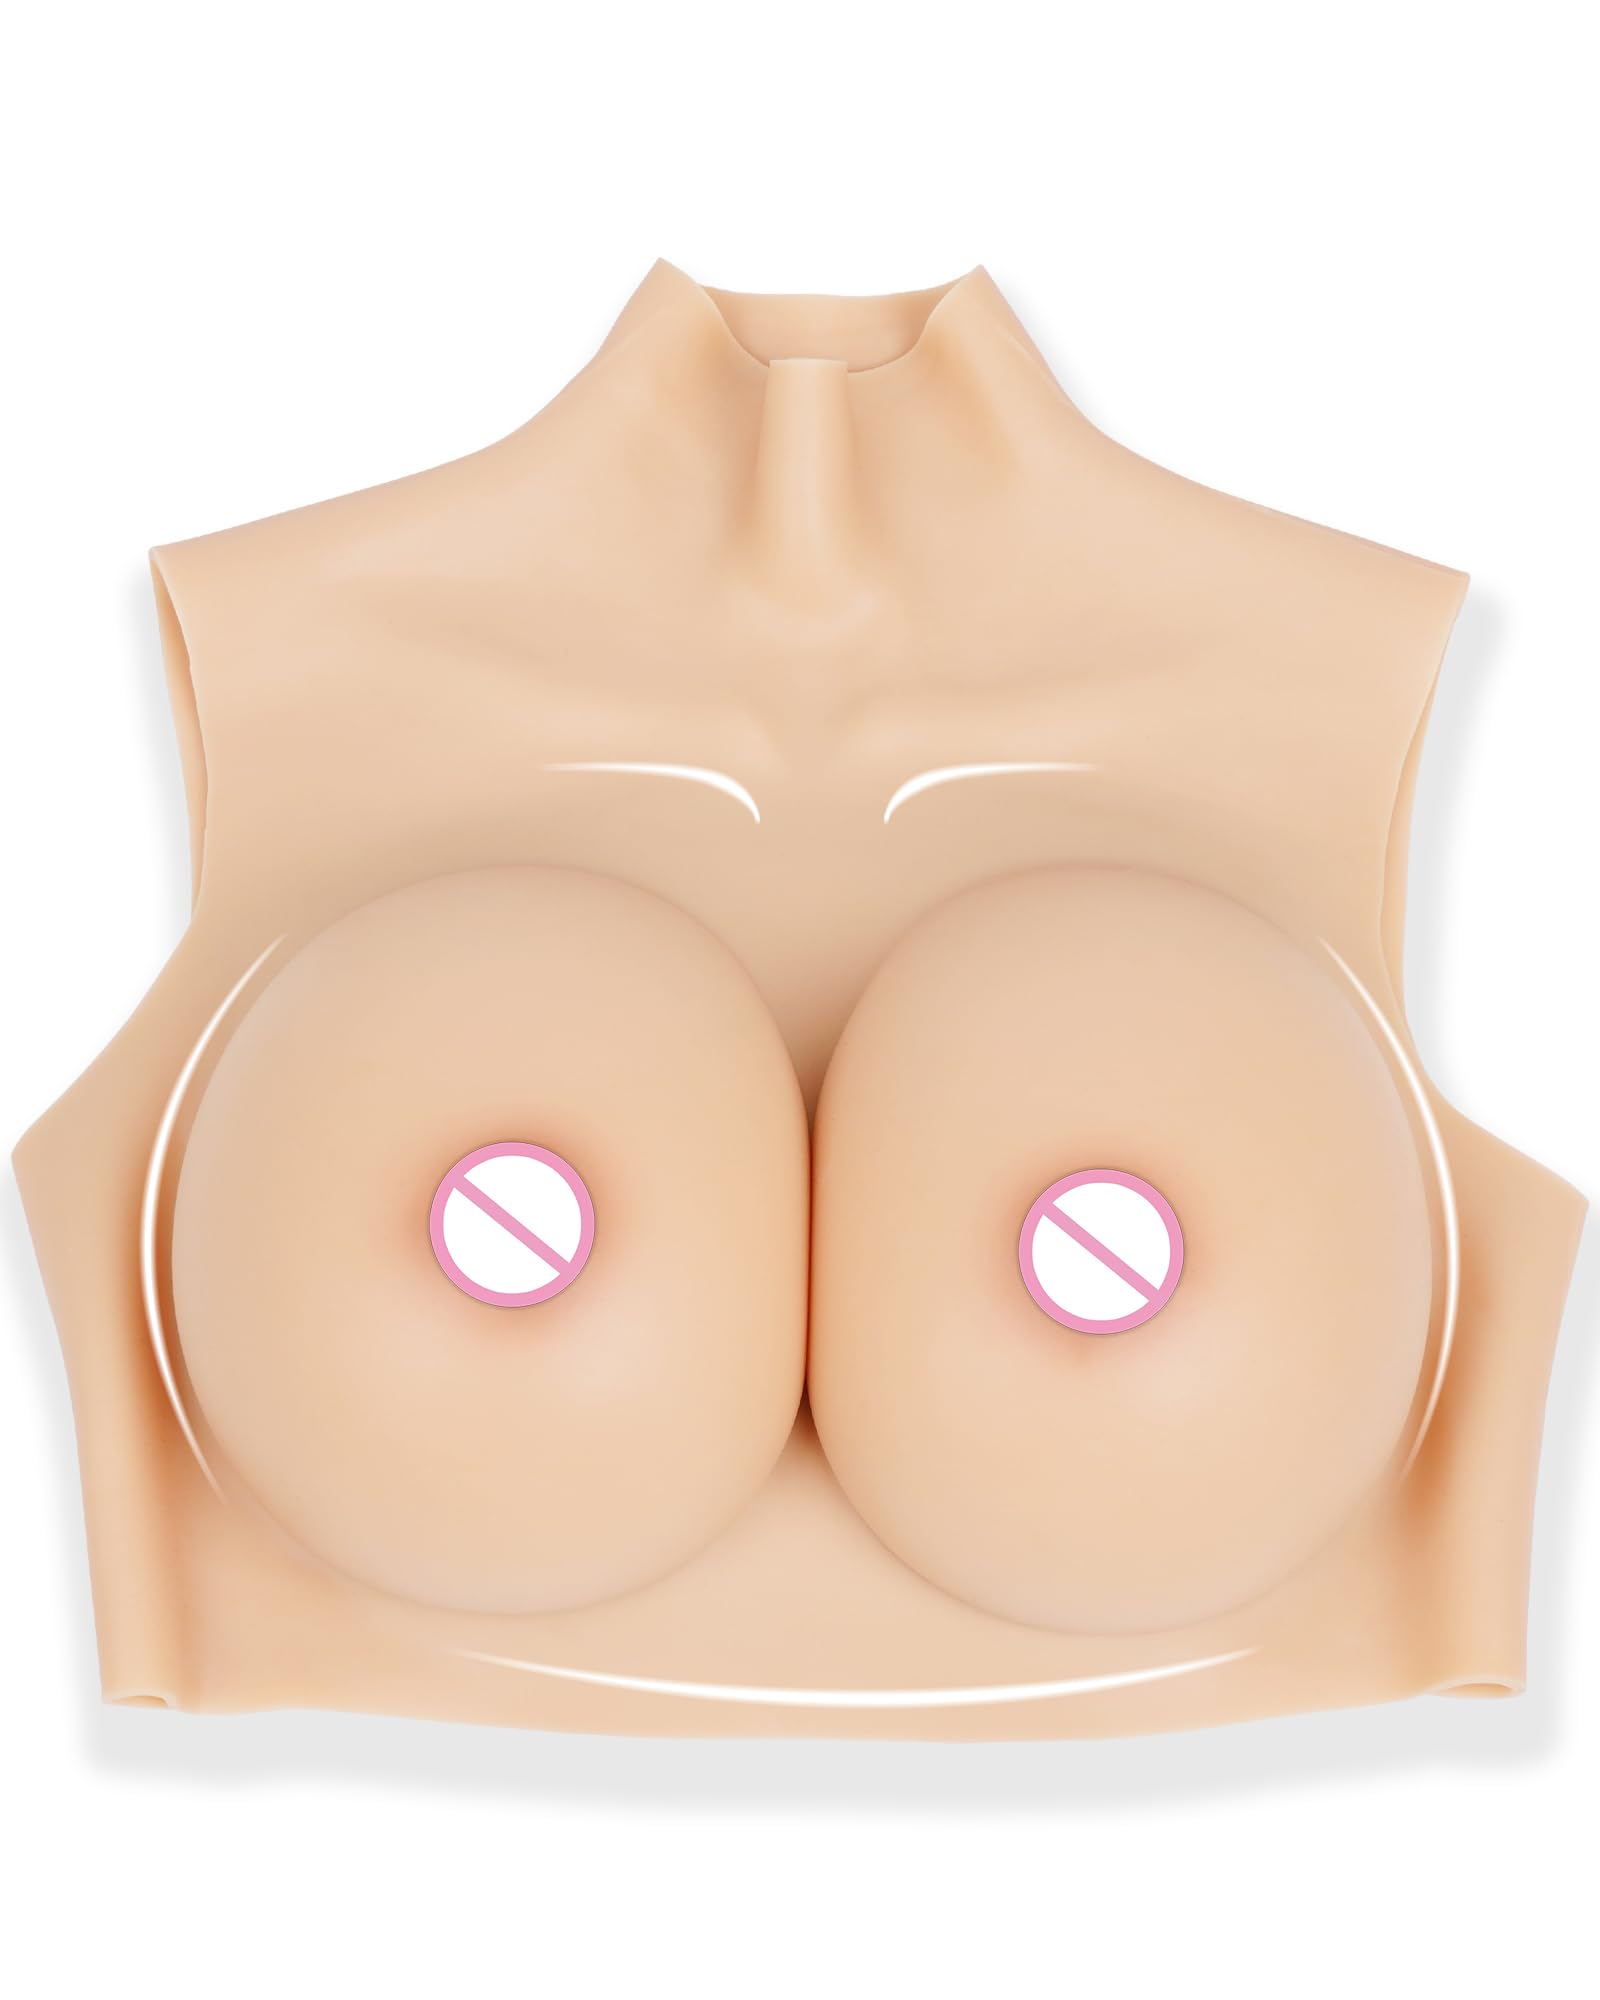 GUIENRLEA Fake boobs Silicone breast forms Breast For Cross dressers Drag Queen Transgenders Cosplay